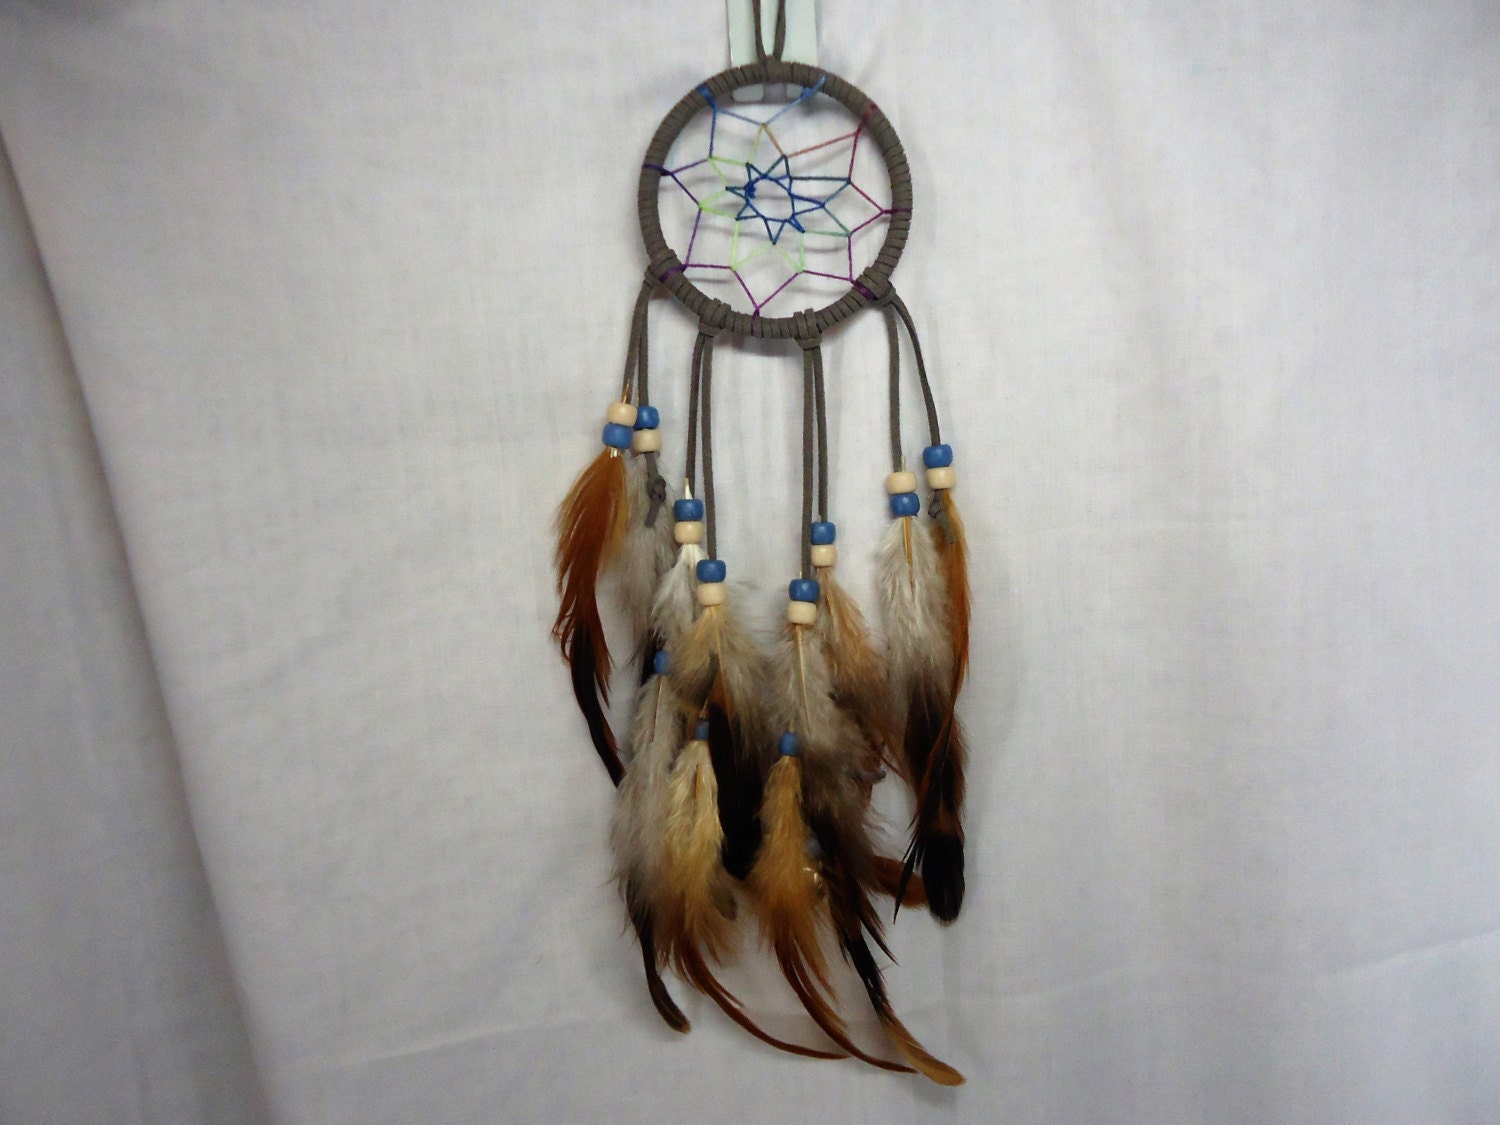 dream catcher made by native american